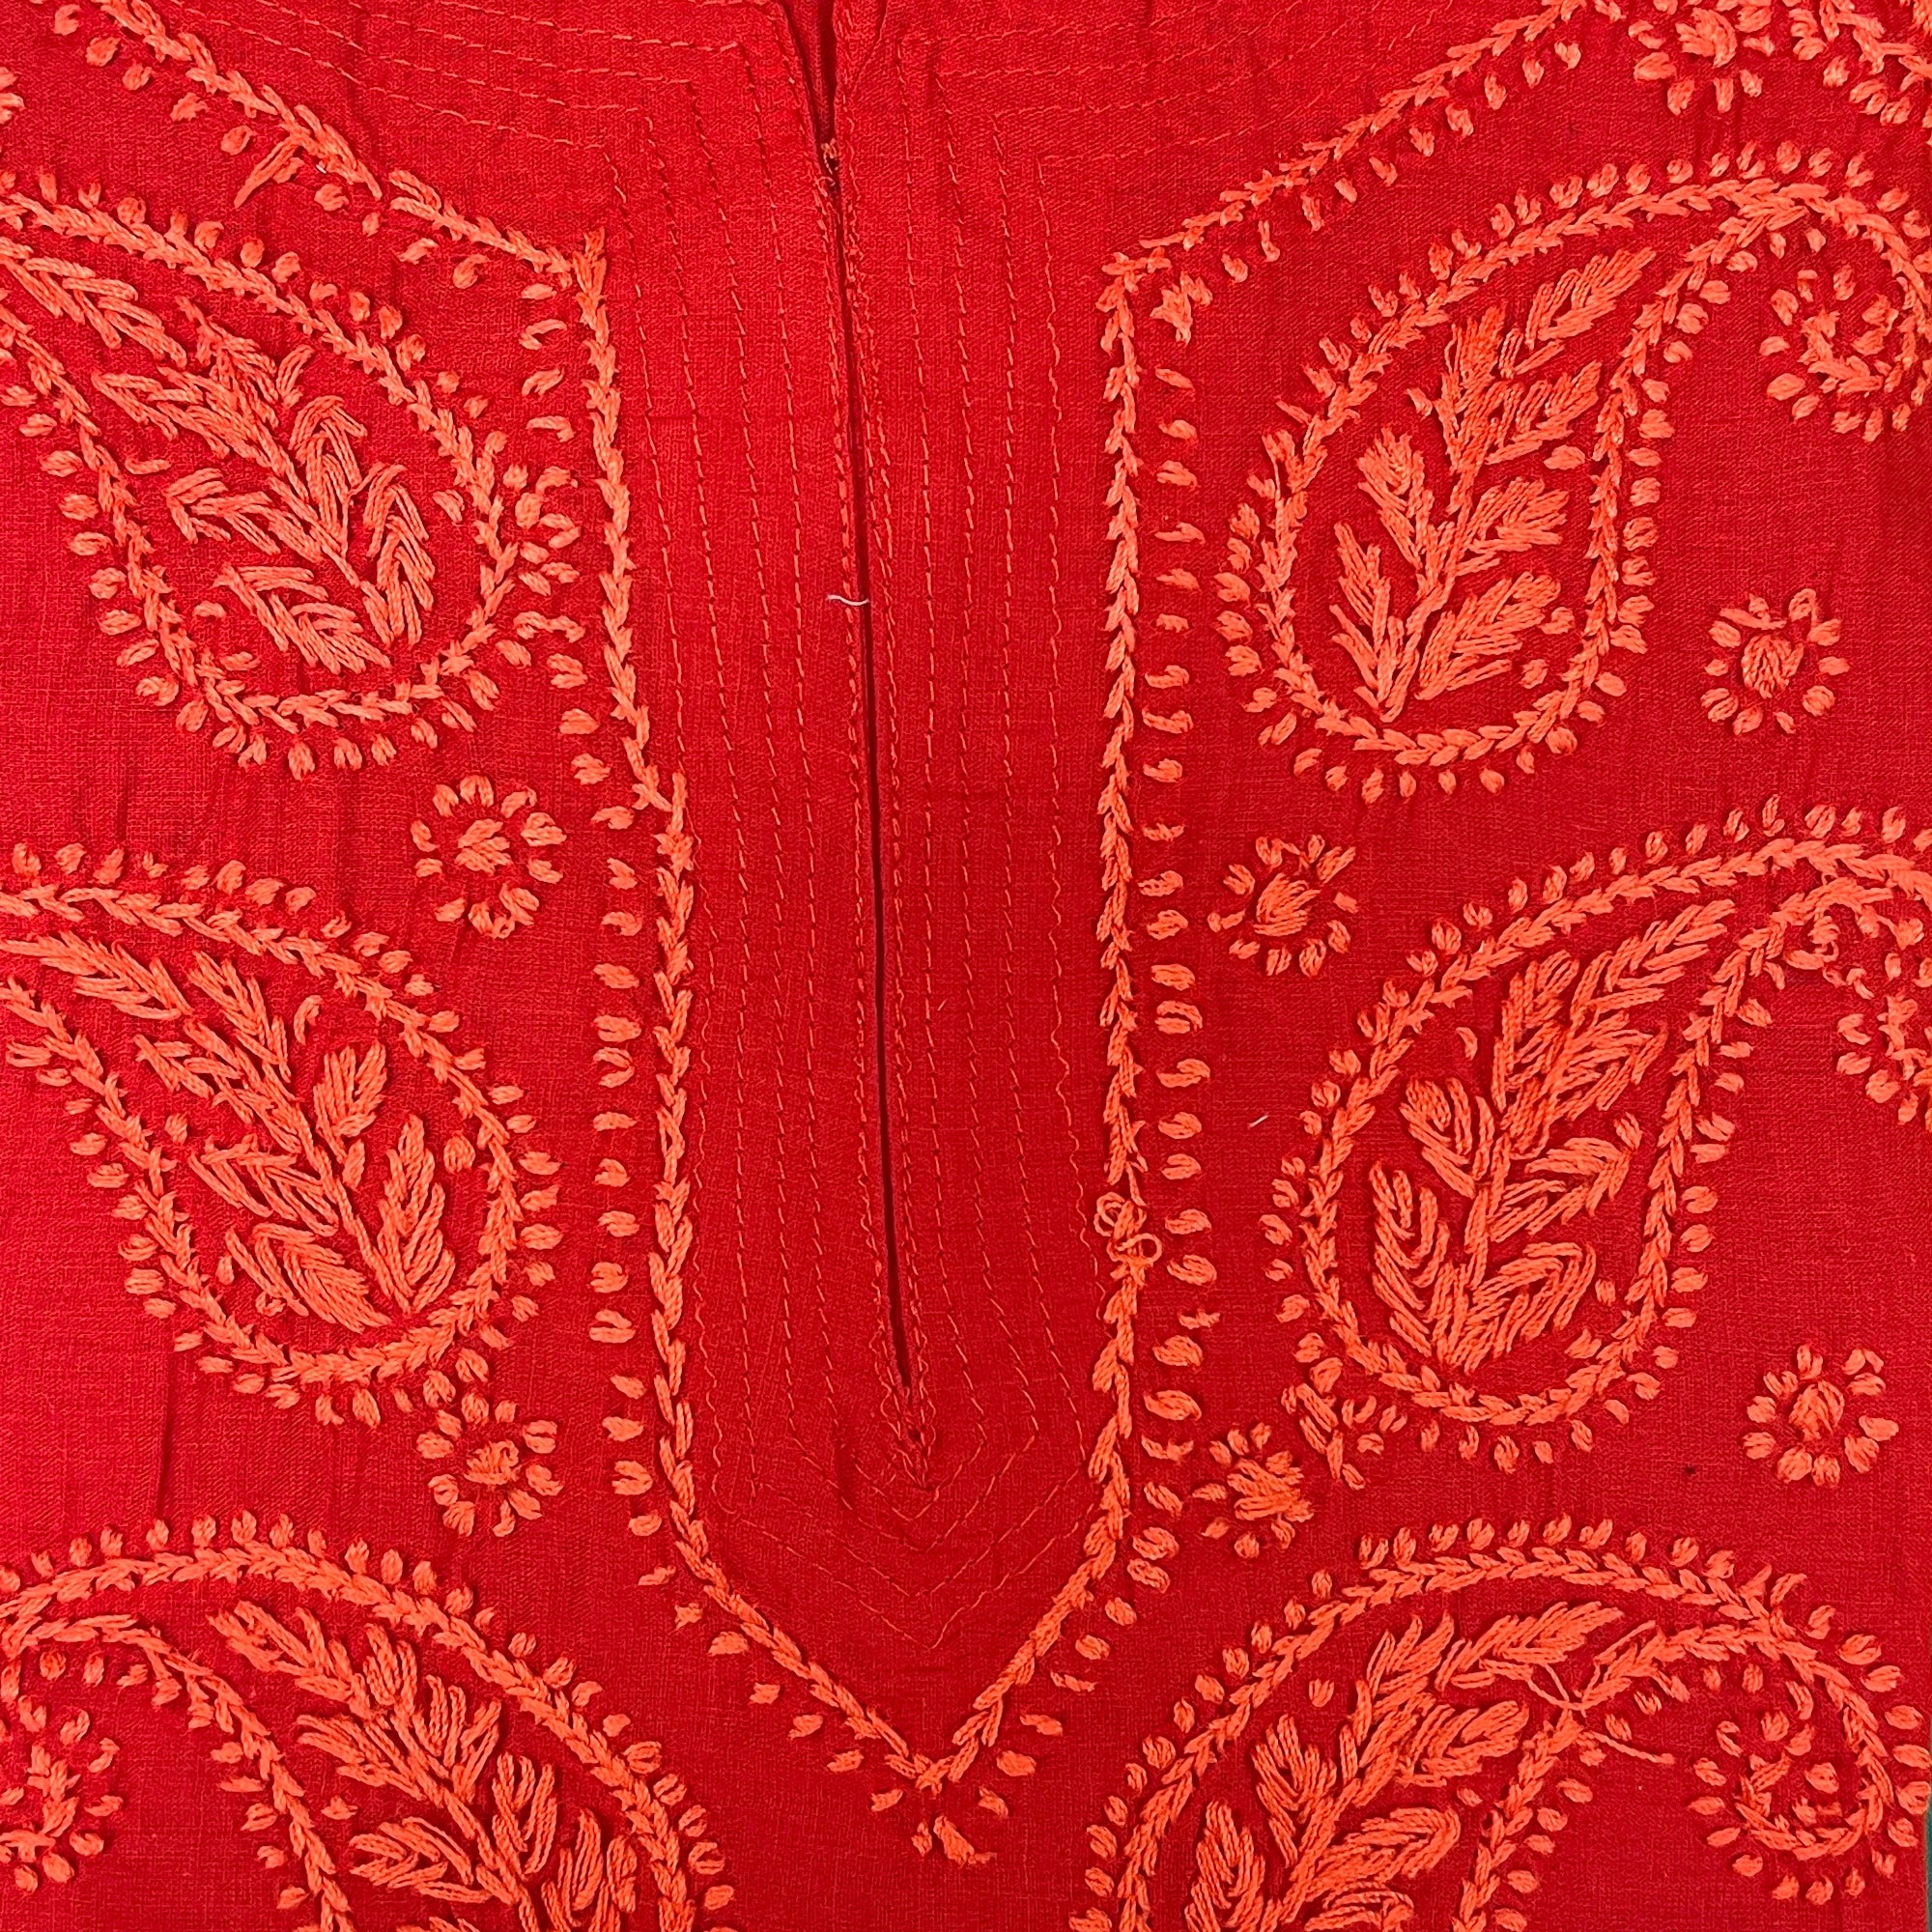 AR Long Embroidered Cotton Tunic- XXL - Vintage India NYC